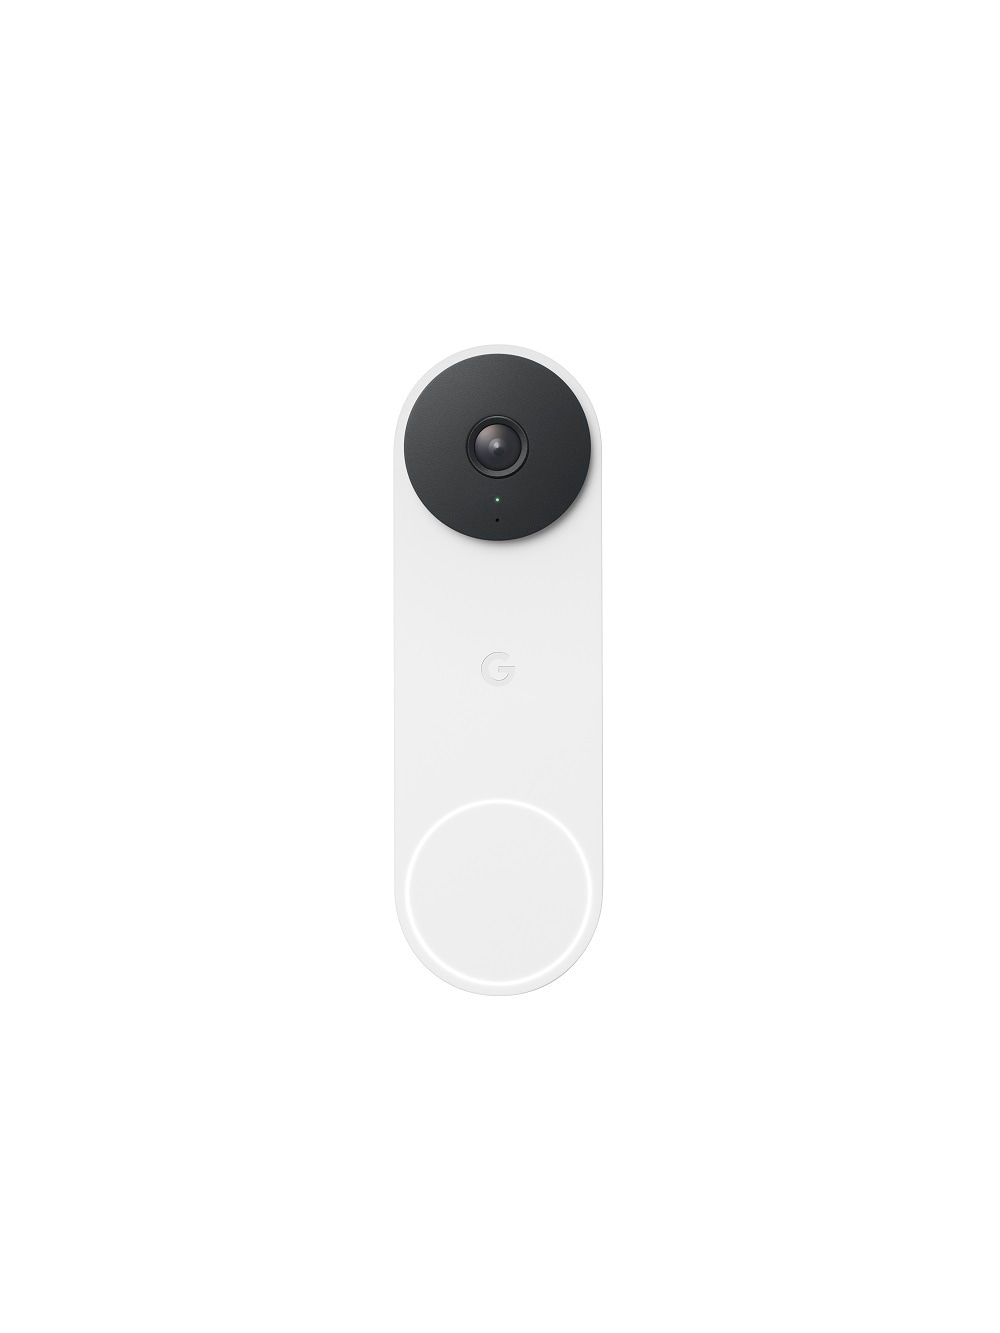 Google Nest Doorbell (battery), HDR Video and Night Vision